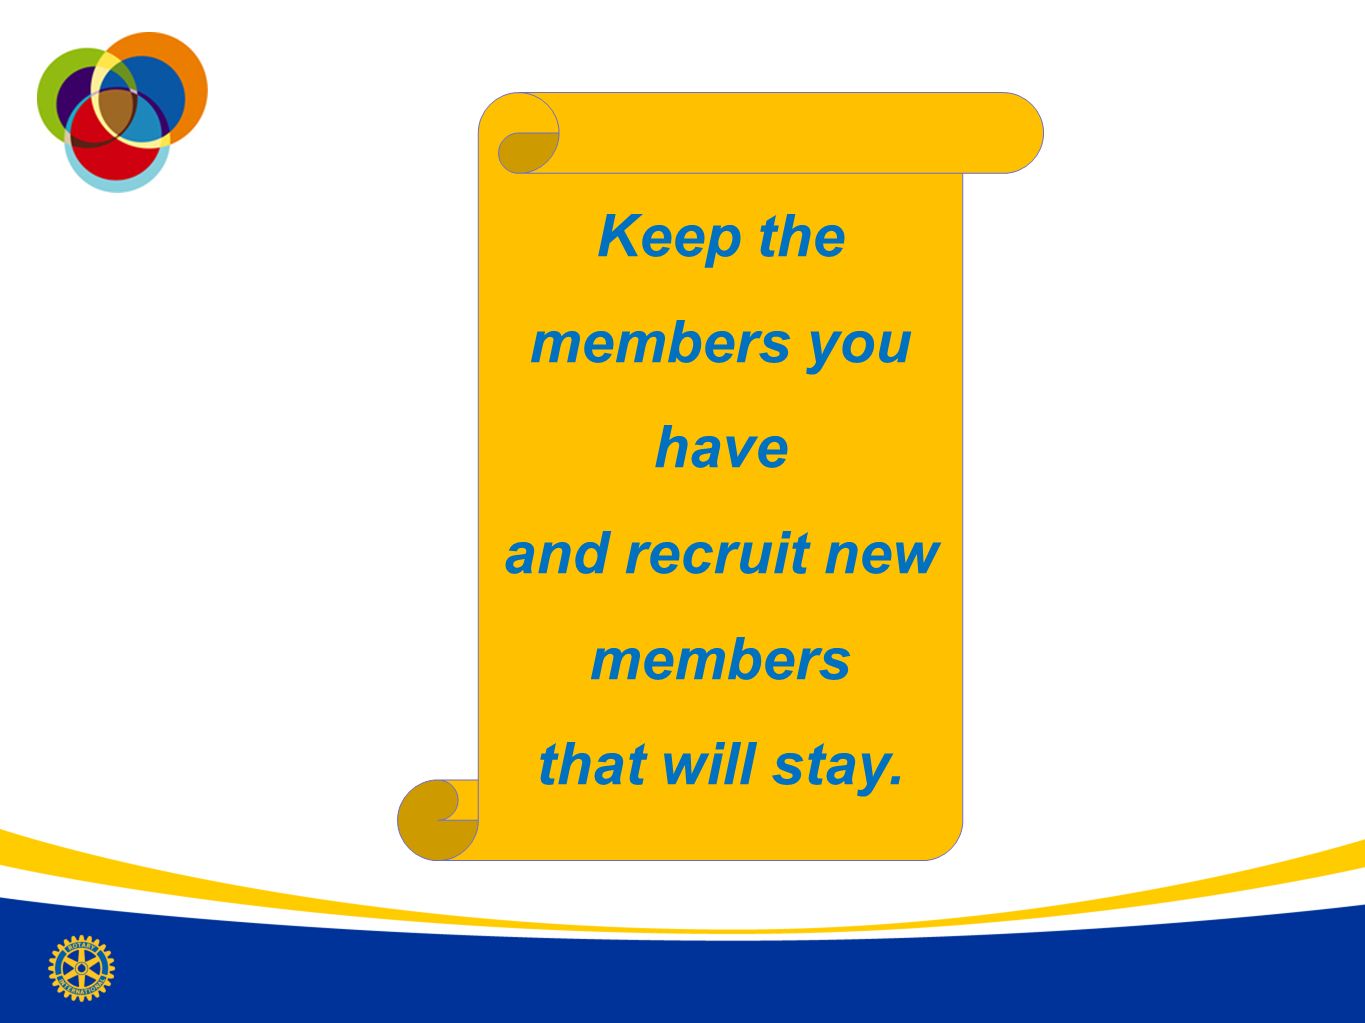 Keep the members you have and recruit new members